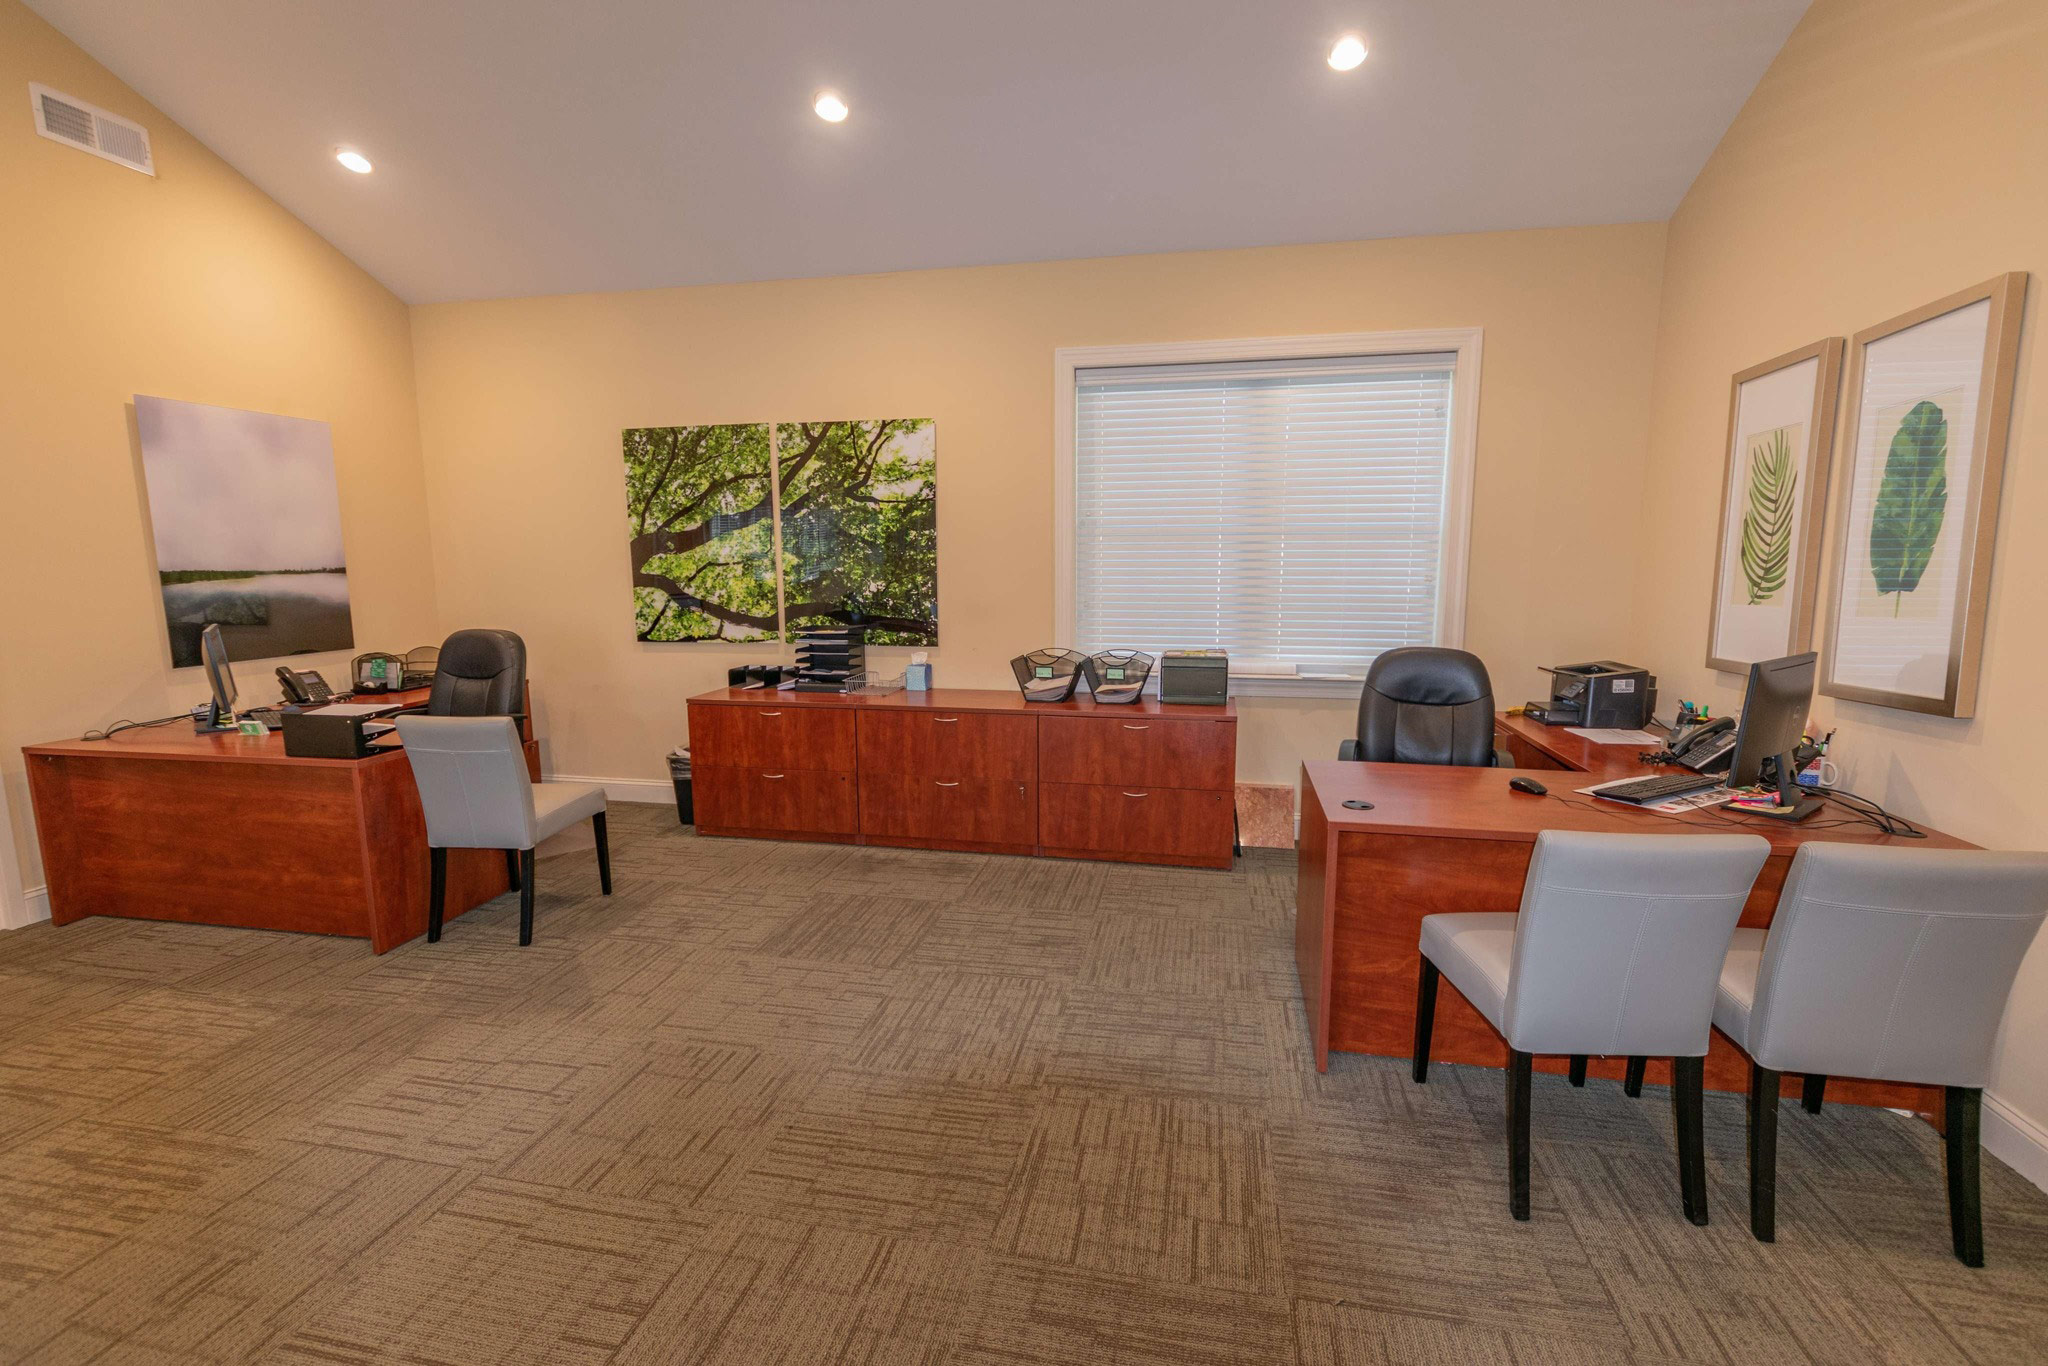 Rosetree Crossing Apartments leasing office